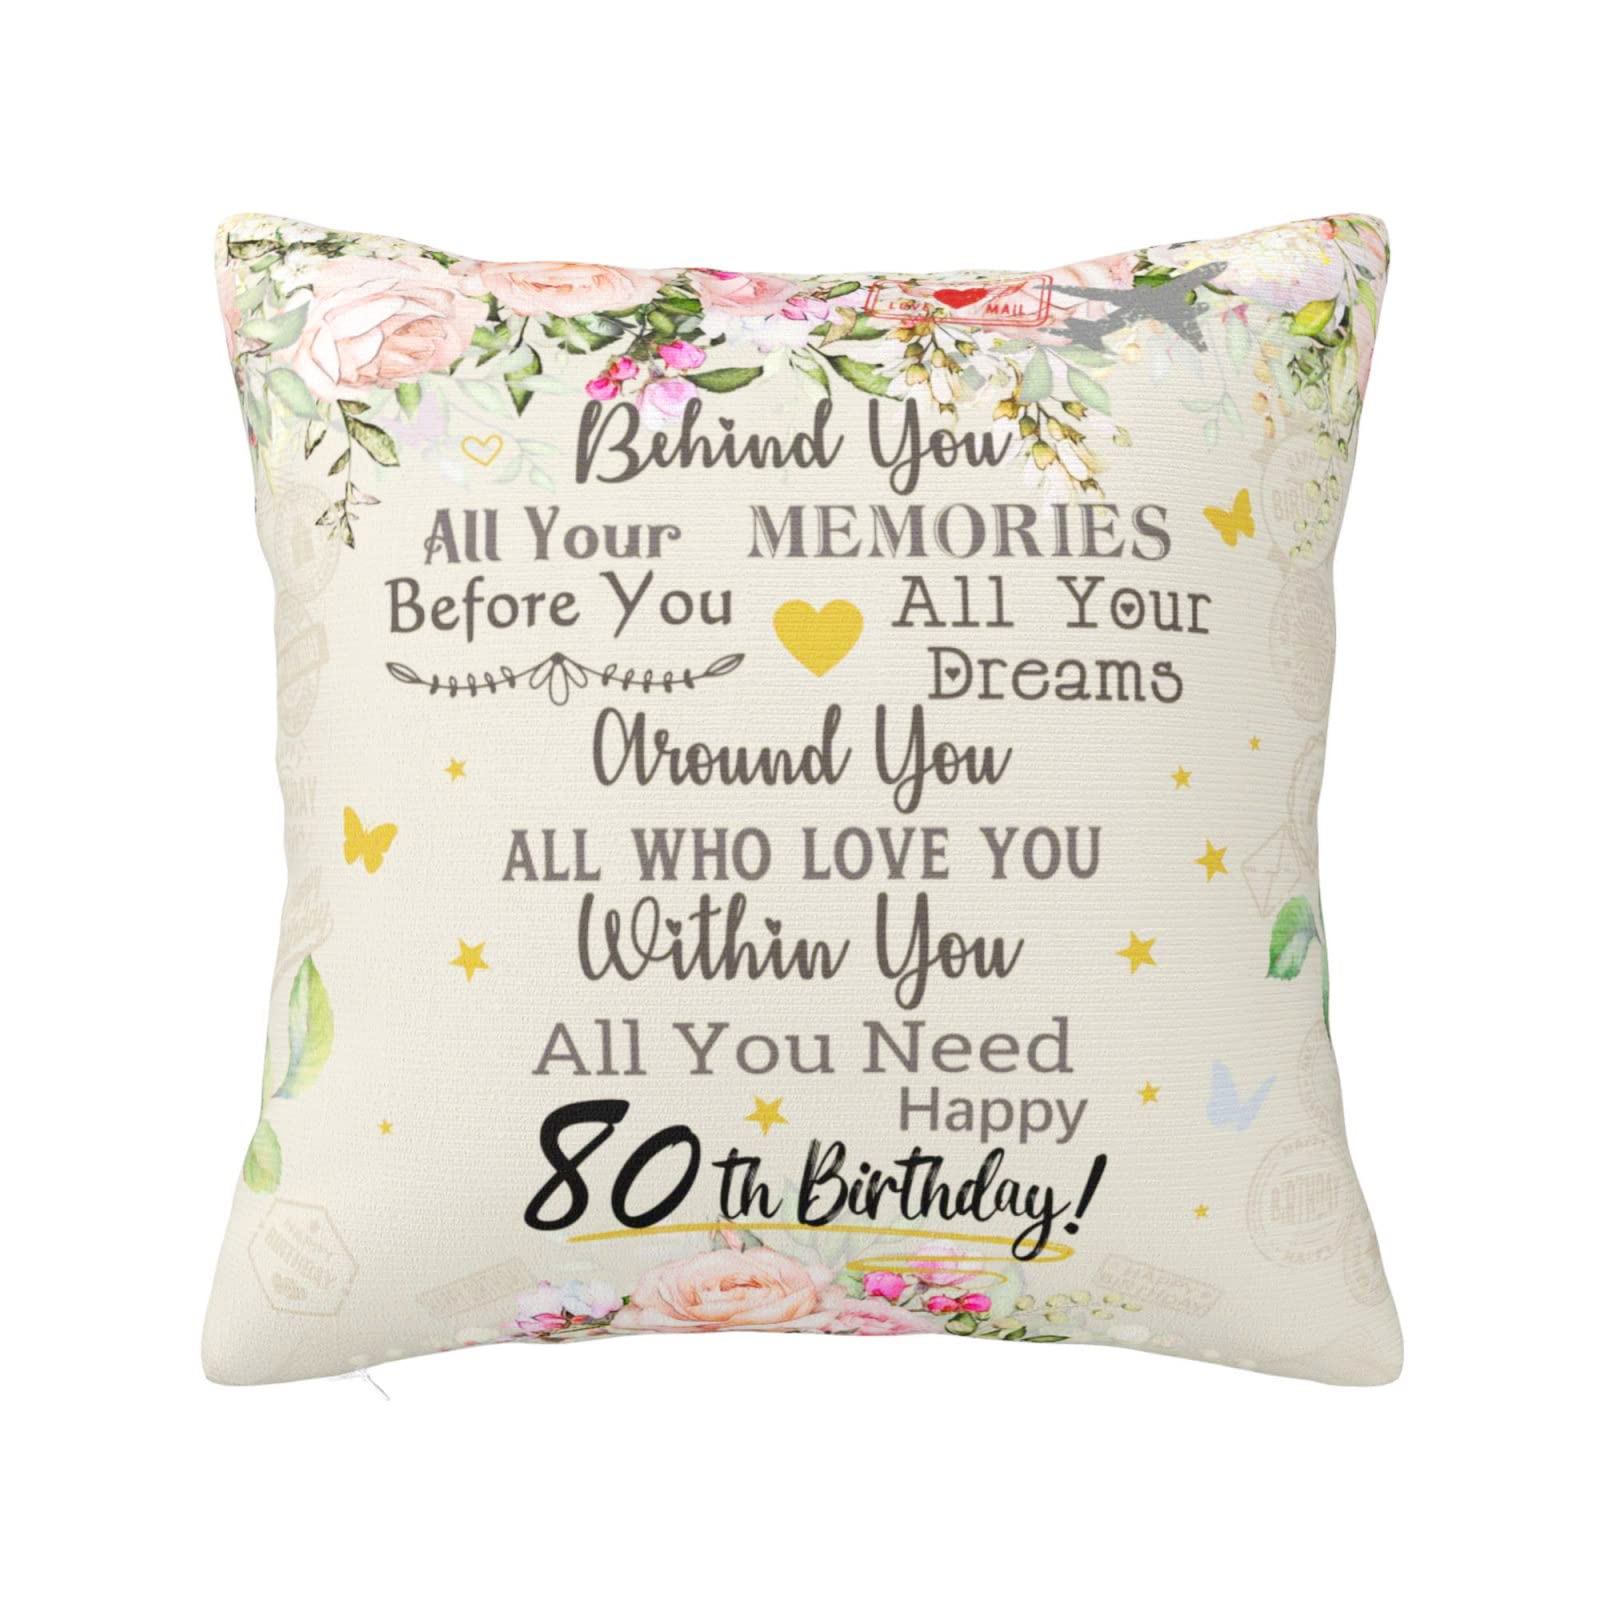 TRISG 80th Birthday Gifts for Women Pillow Covers